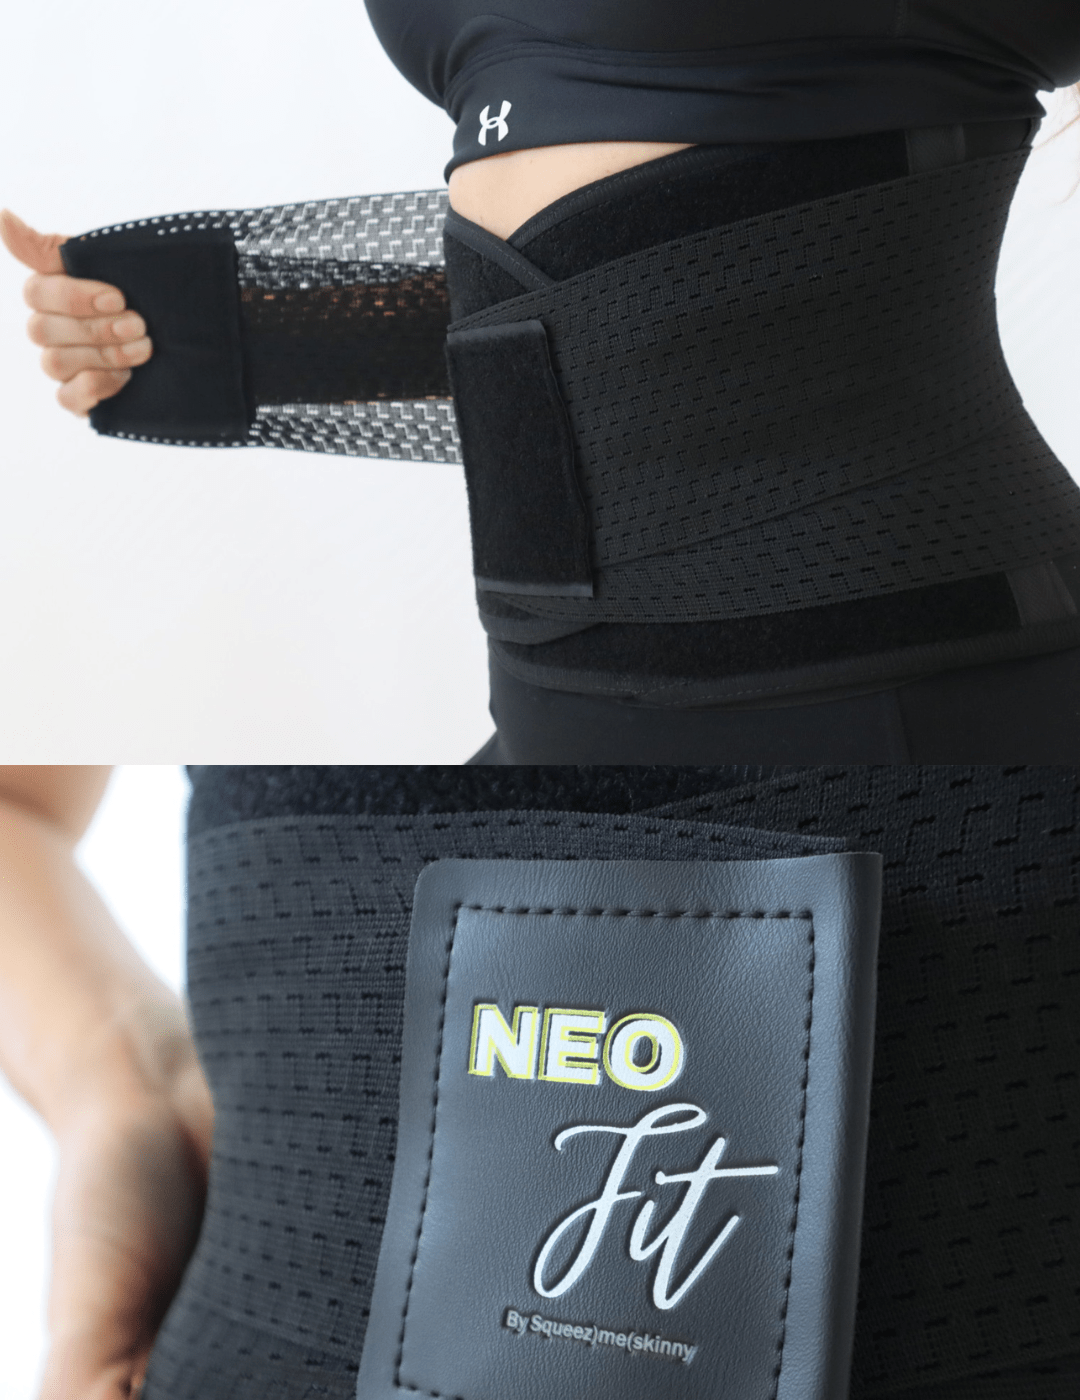 SWEAT BELT Combo Premium Arm Belt + Slimming Belt for Stomach Fitness for  Exercise & Workout for Men and Women Made of Neoprene